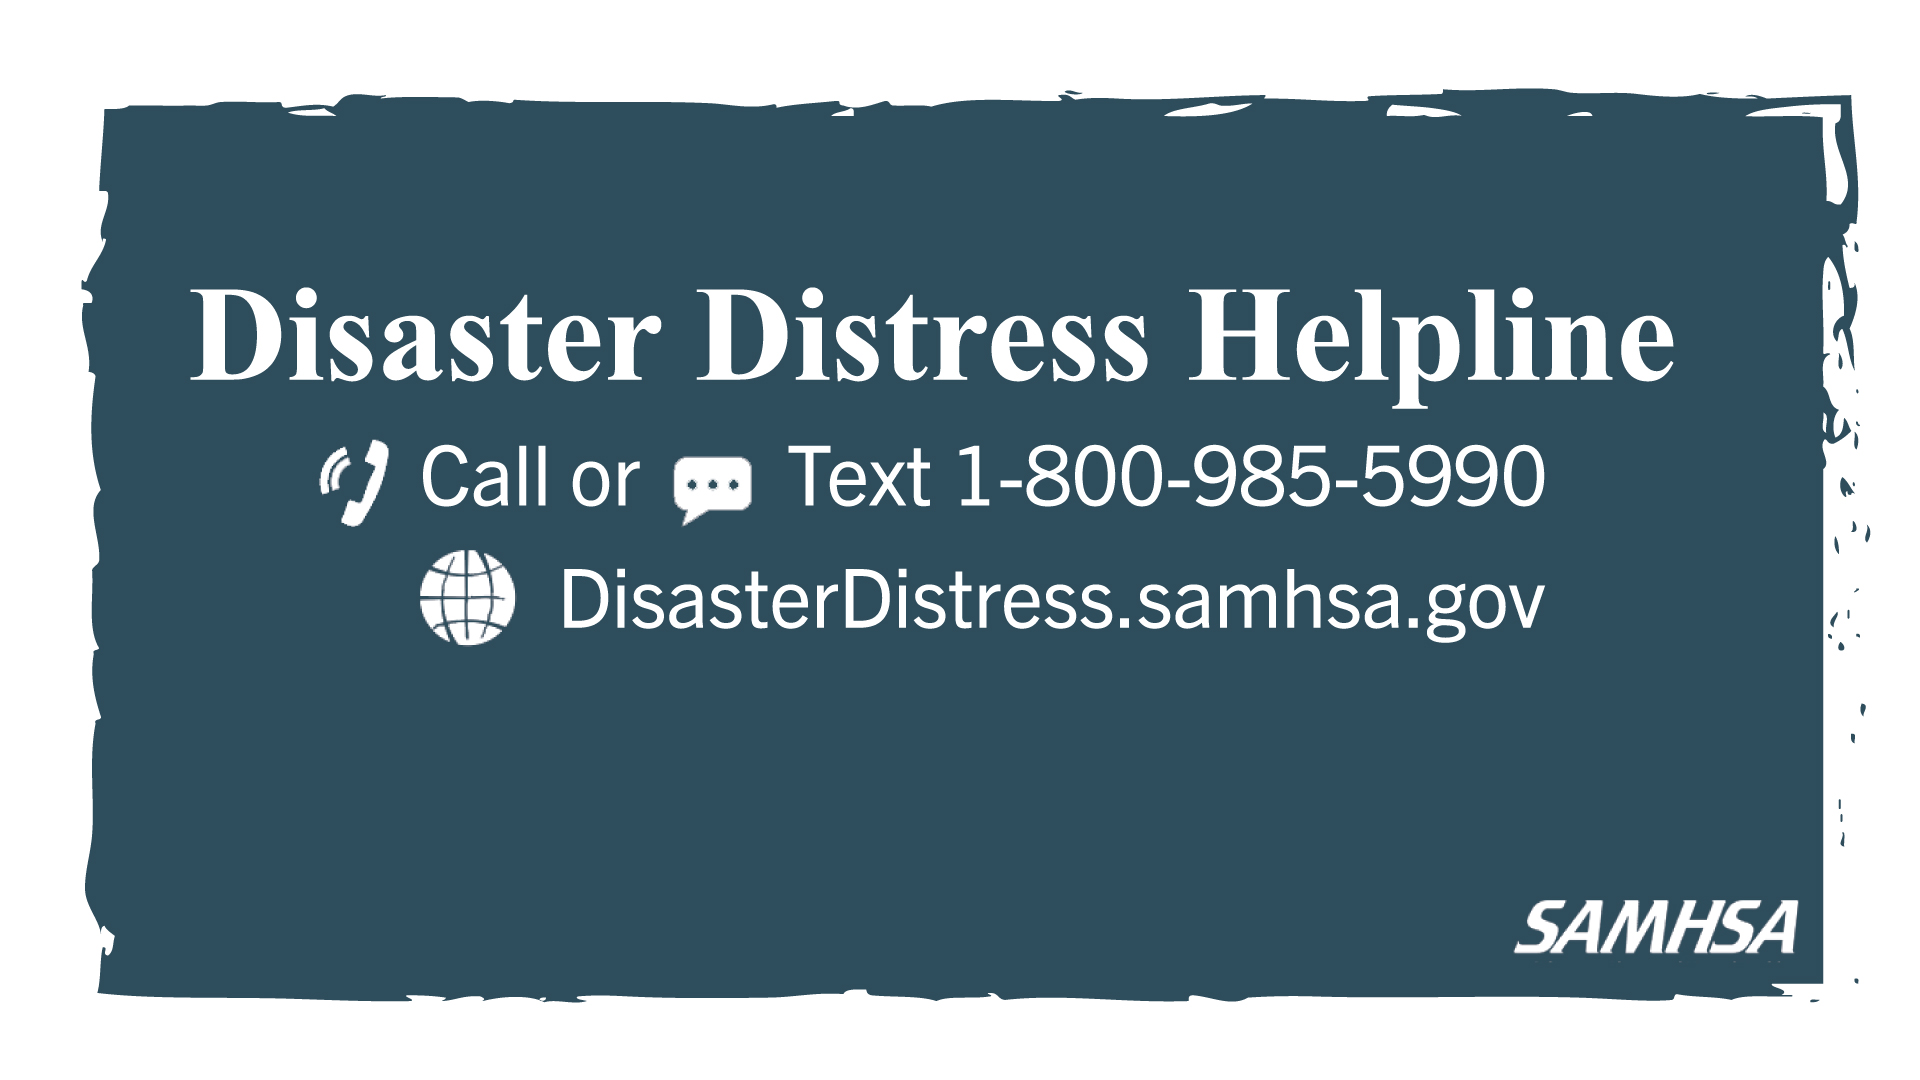 Disaster Distress Helpline, call or text 1-800-985-5990